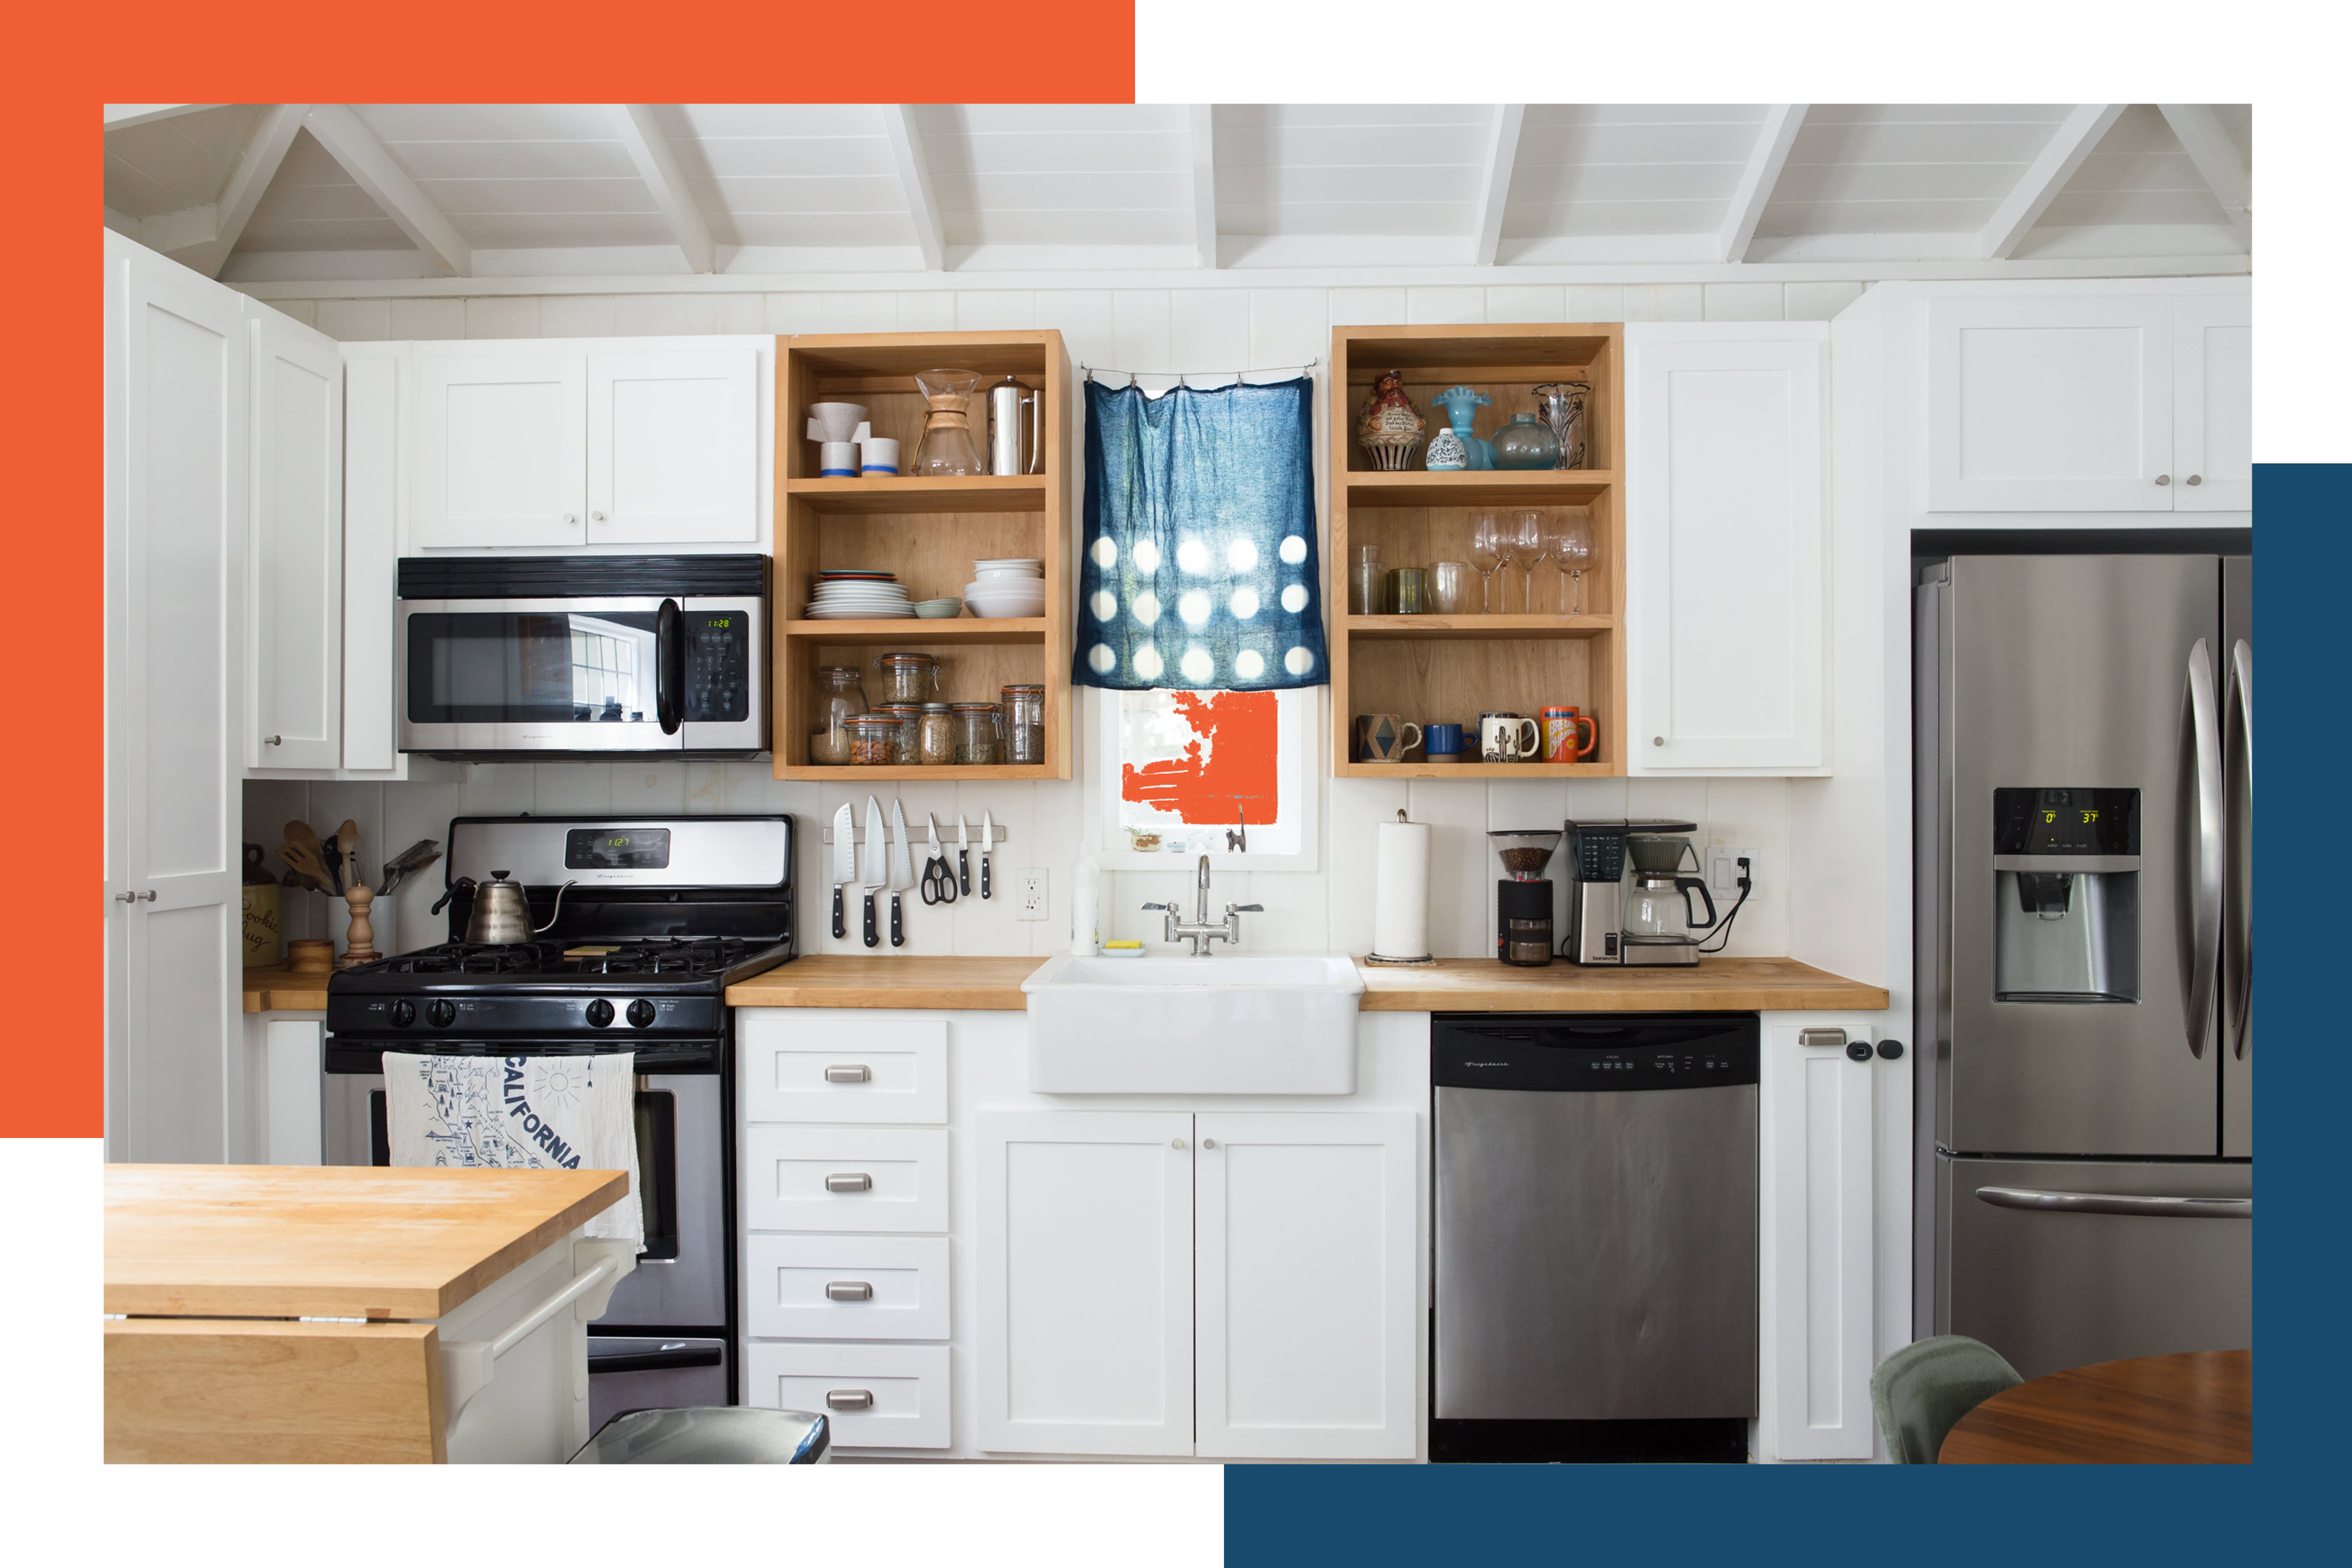 5 Reasons To Buy Compact Appliances For a Kitchen Renovation